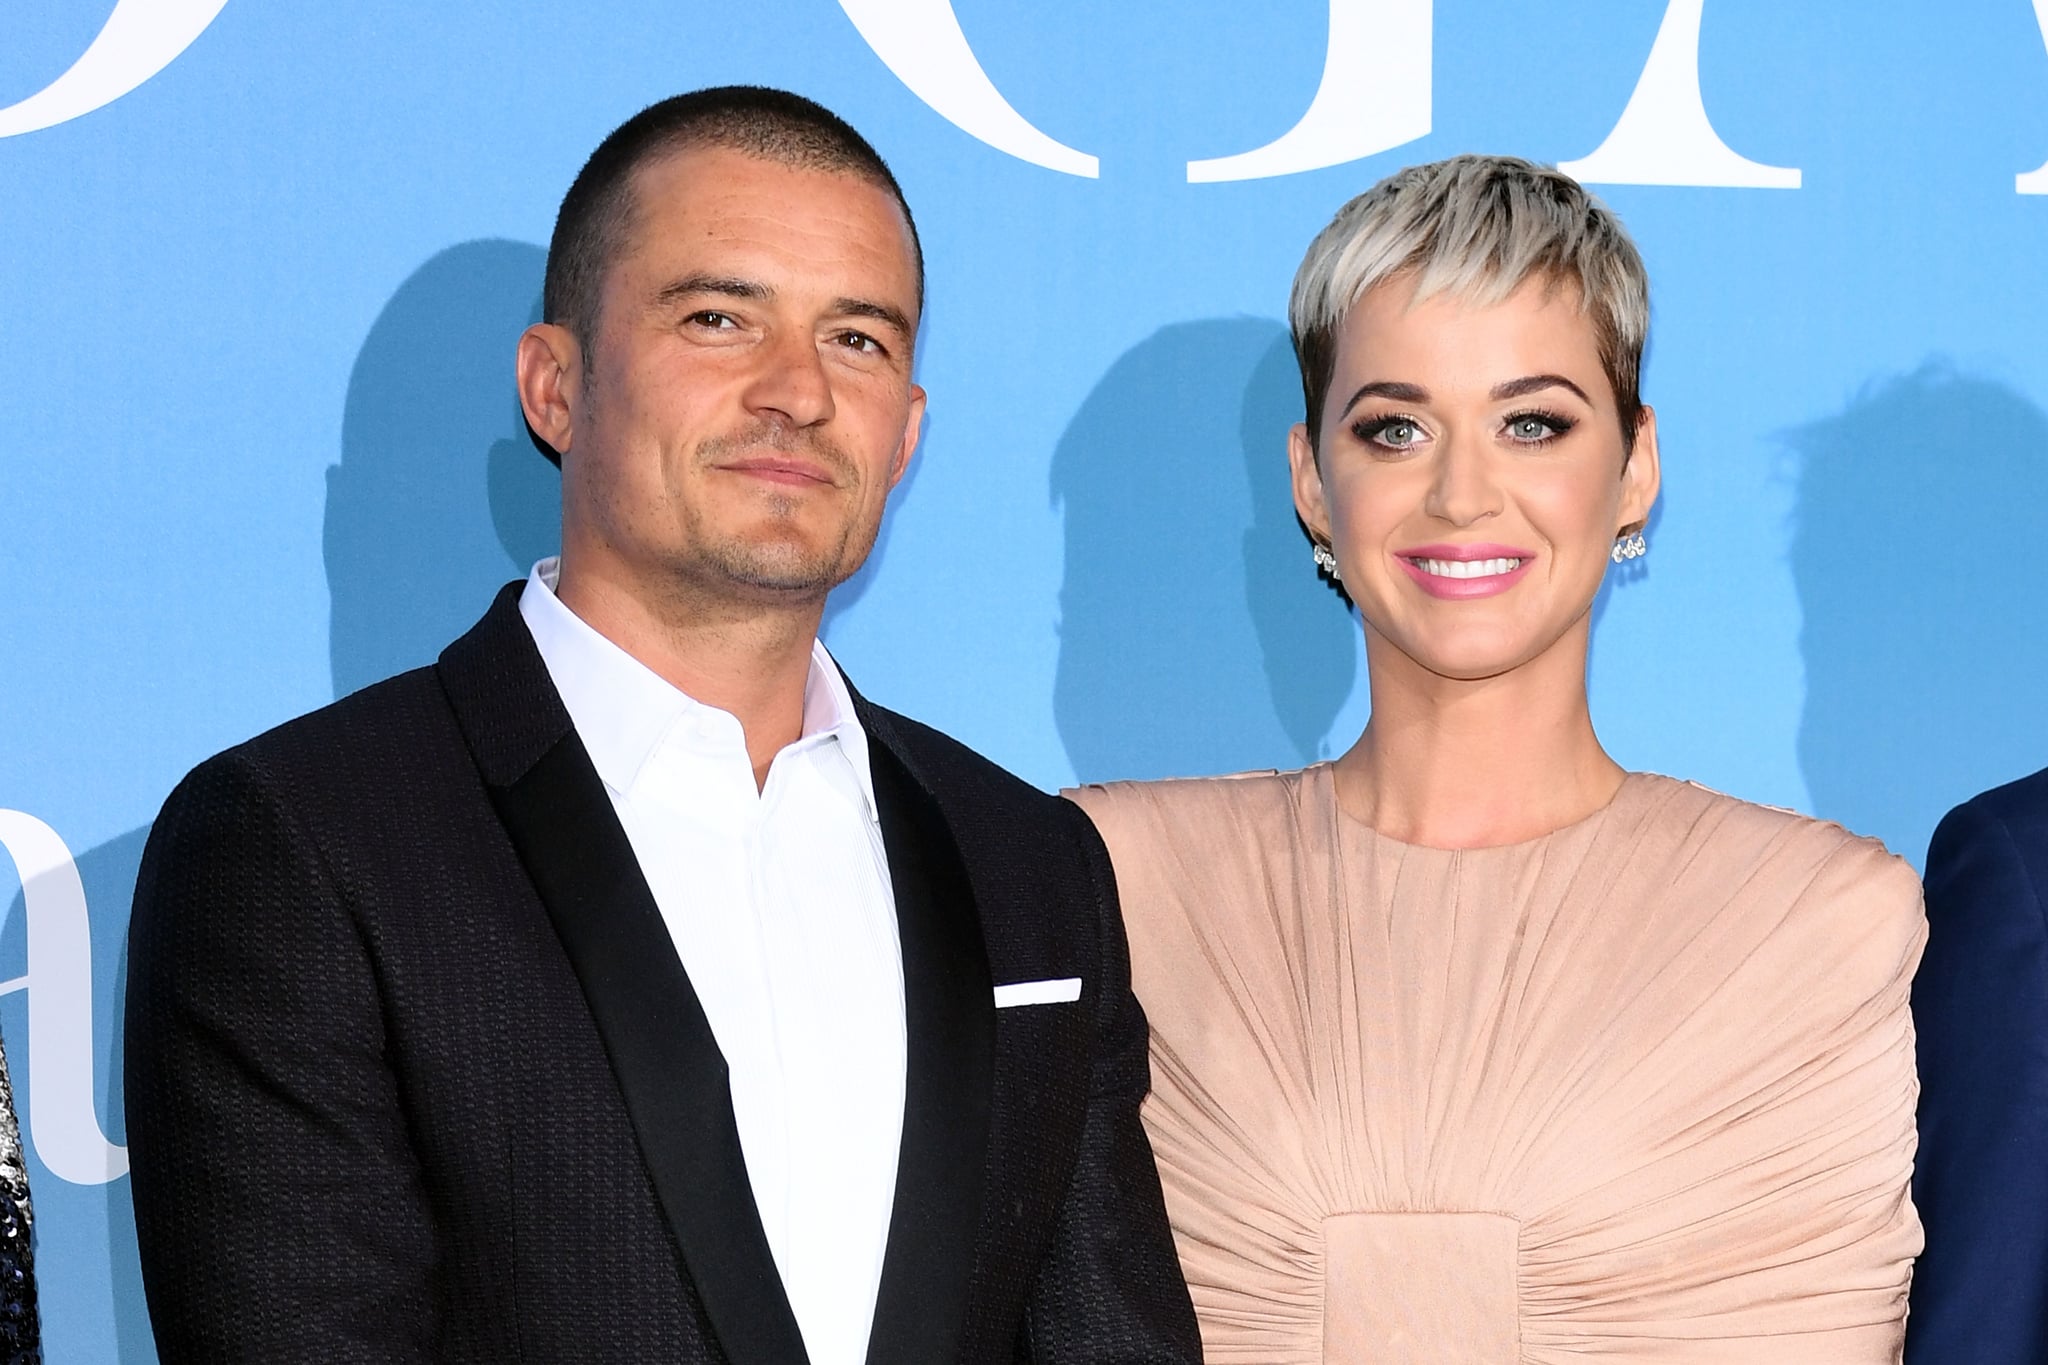 MONTE-CARLO, MONACO - SEPTEMBER 26:  Orlando Bloom and Katy Perry attend the Gala for the Global Ocean hosted by H.S.H. Prince Albert II of Monaco at Opera of Monte-Carlo on September 26, 2018 in Monte-Carlo, Monaco.  (Photo by Daniele Venturelli/Daniele Venturelli/ Getty Images)